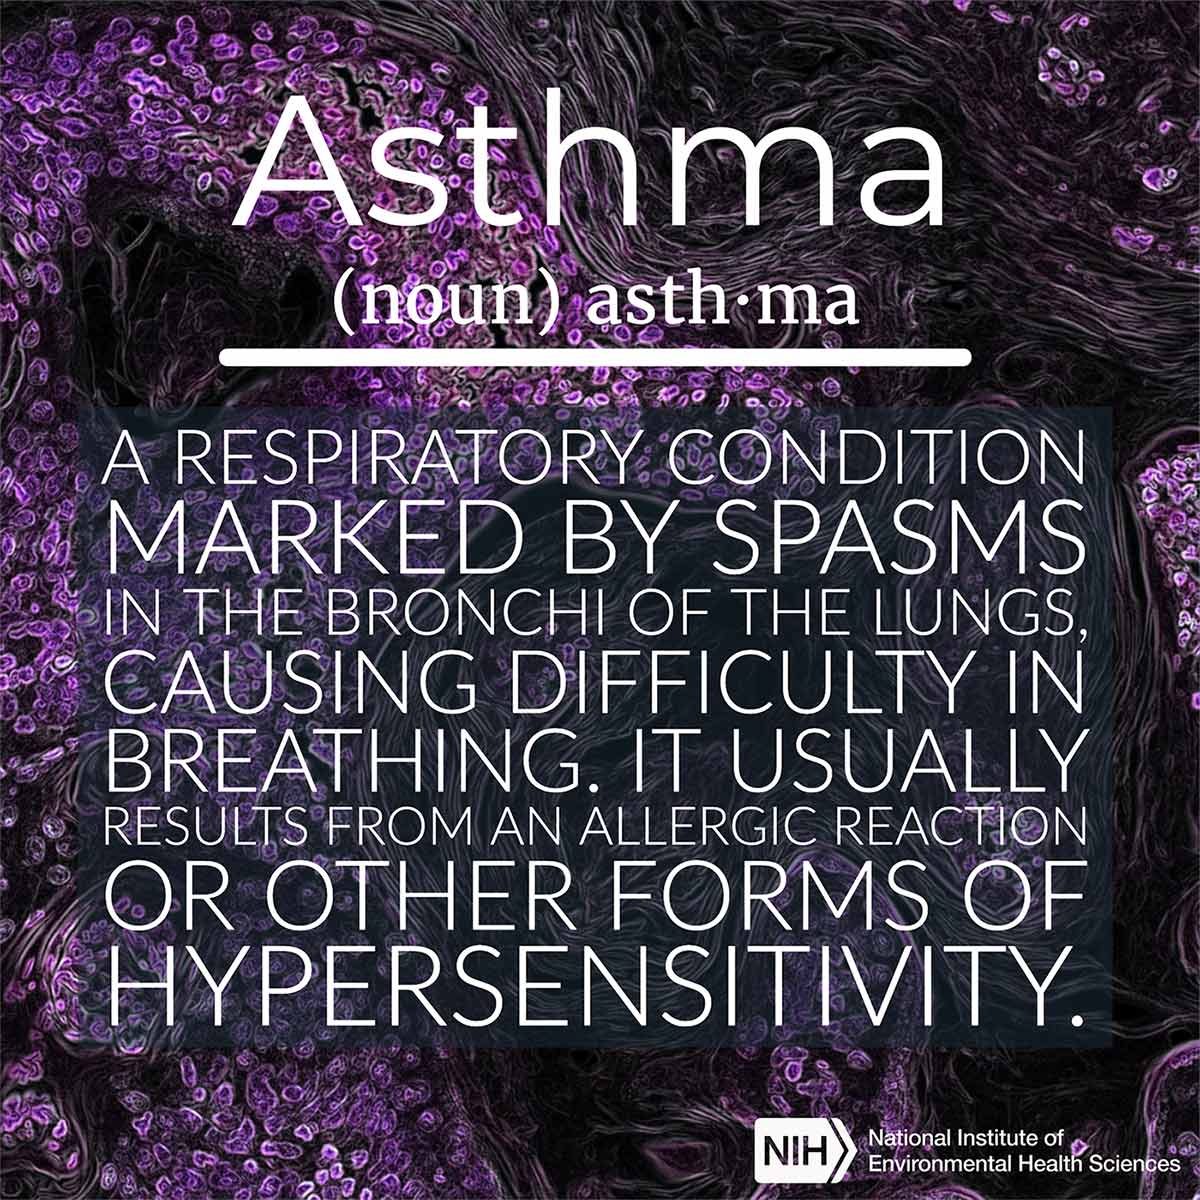 Asthma (noun) defined as &#39;A respiratory condition marked by spasms in the bronchi of the lungs, causing difficulty breathing. It usually results from an allergic reaction or other forms of hypersensitivity.&#39;